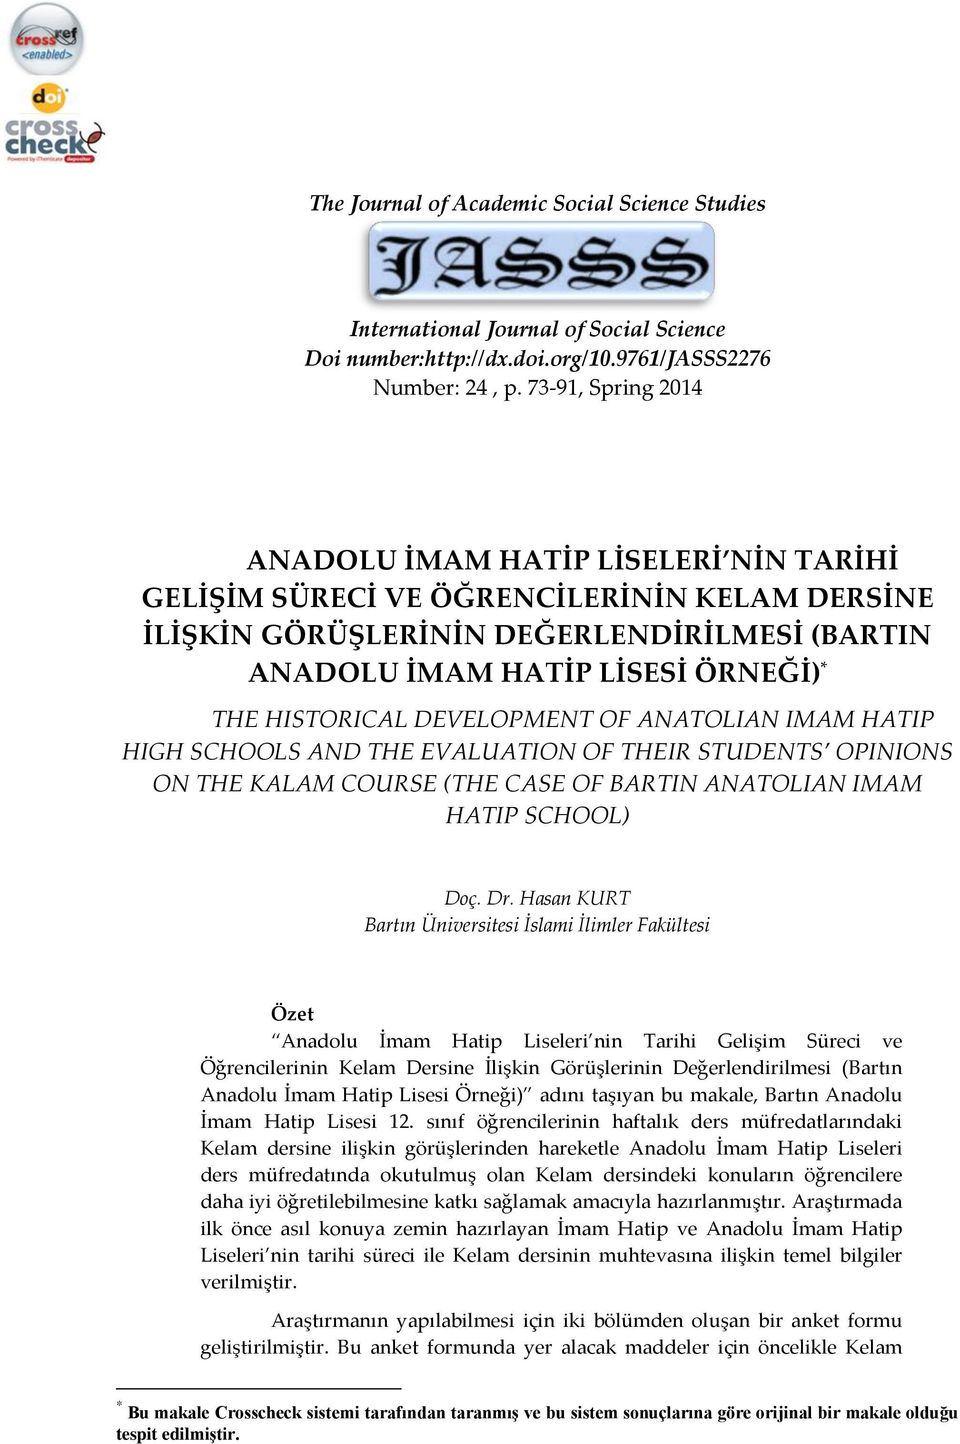 HISTORICAL DEVELOPMENT OF ANATOLIAN IMAM HATIP HIGH SCHOOLS AND THE EVALUATION OF THEIR STUDENTS OPINIONS ON THE KALAM COURSE (THE CASE OF BARTIN ANATOLIAN IMAM HATIP SCHOOL) Doç. Dr.